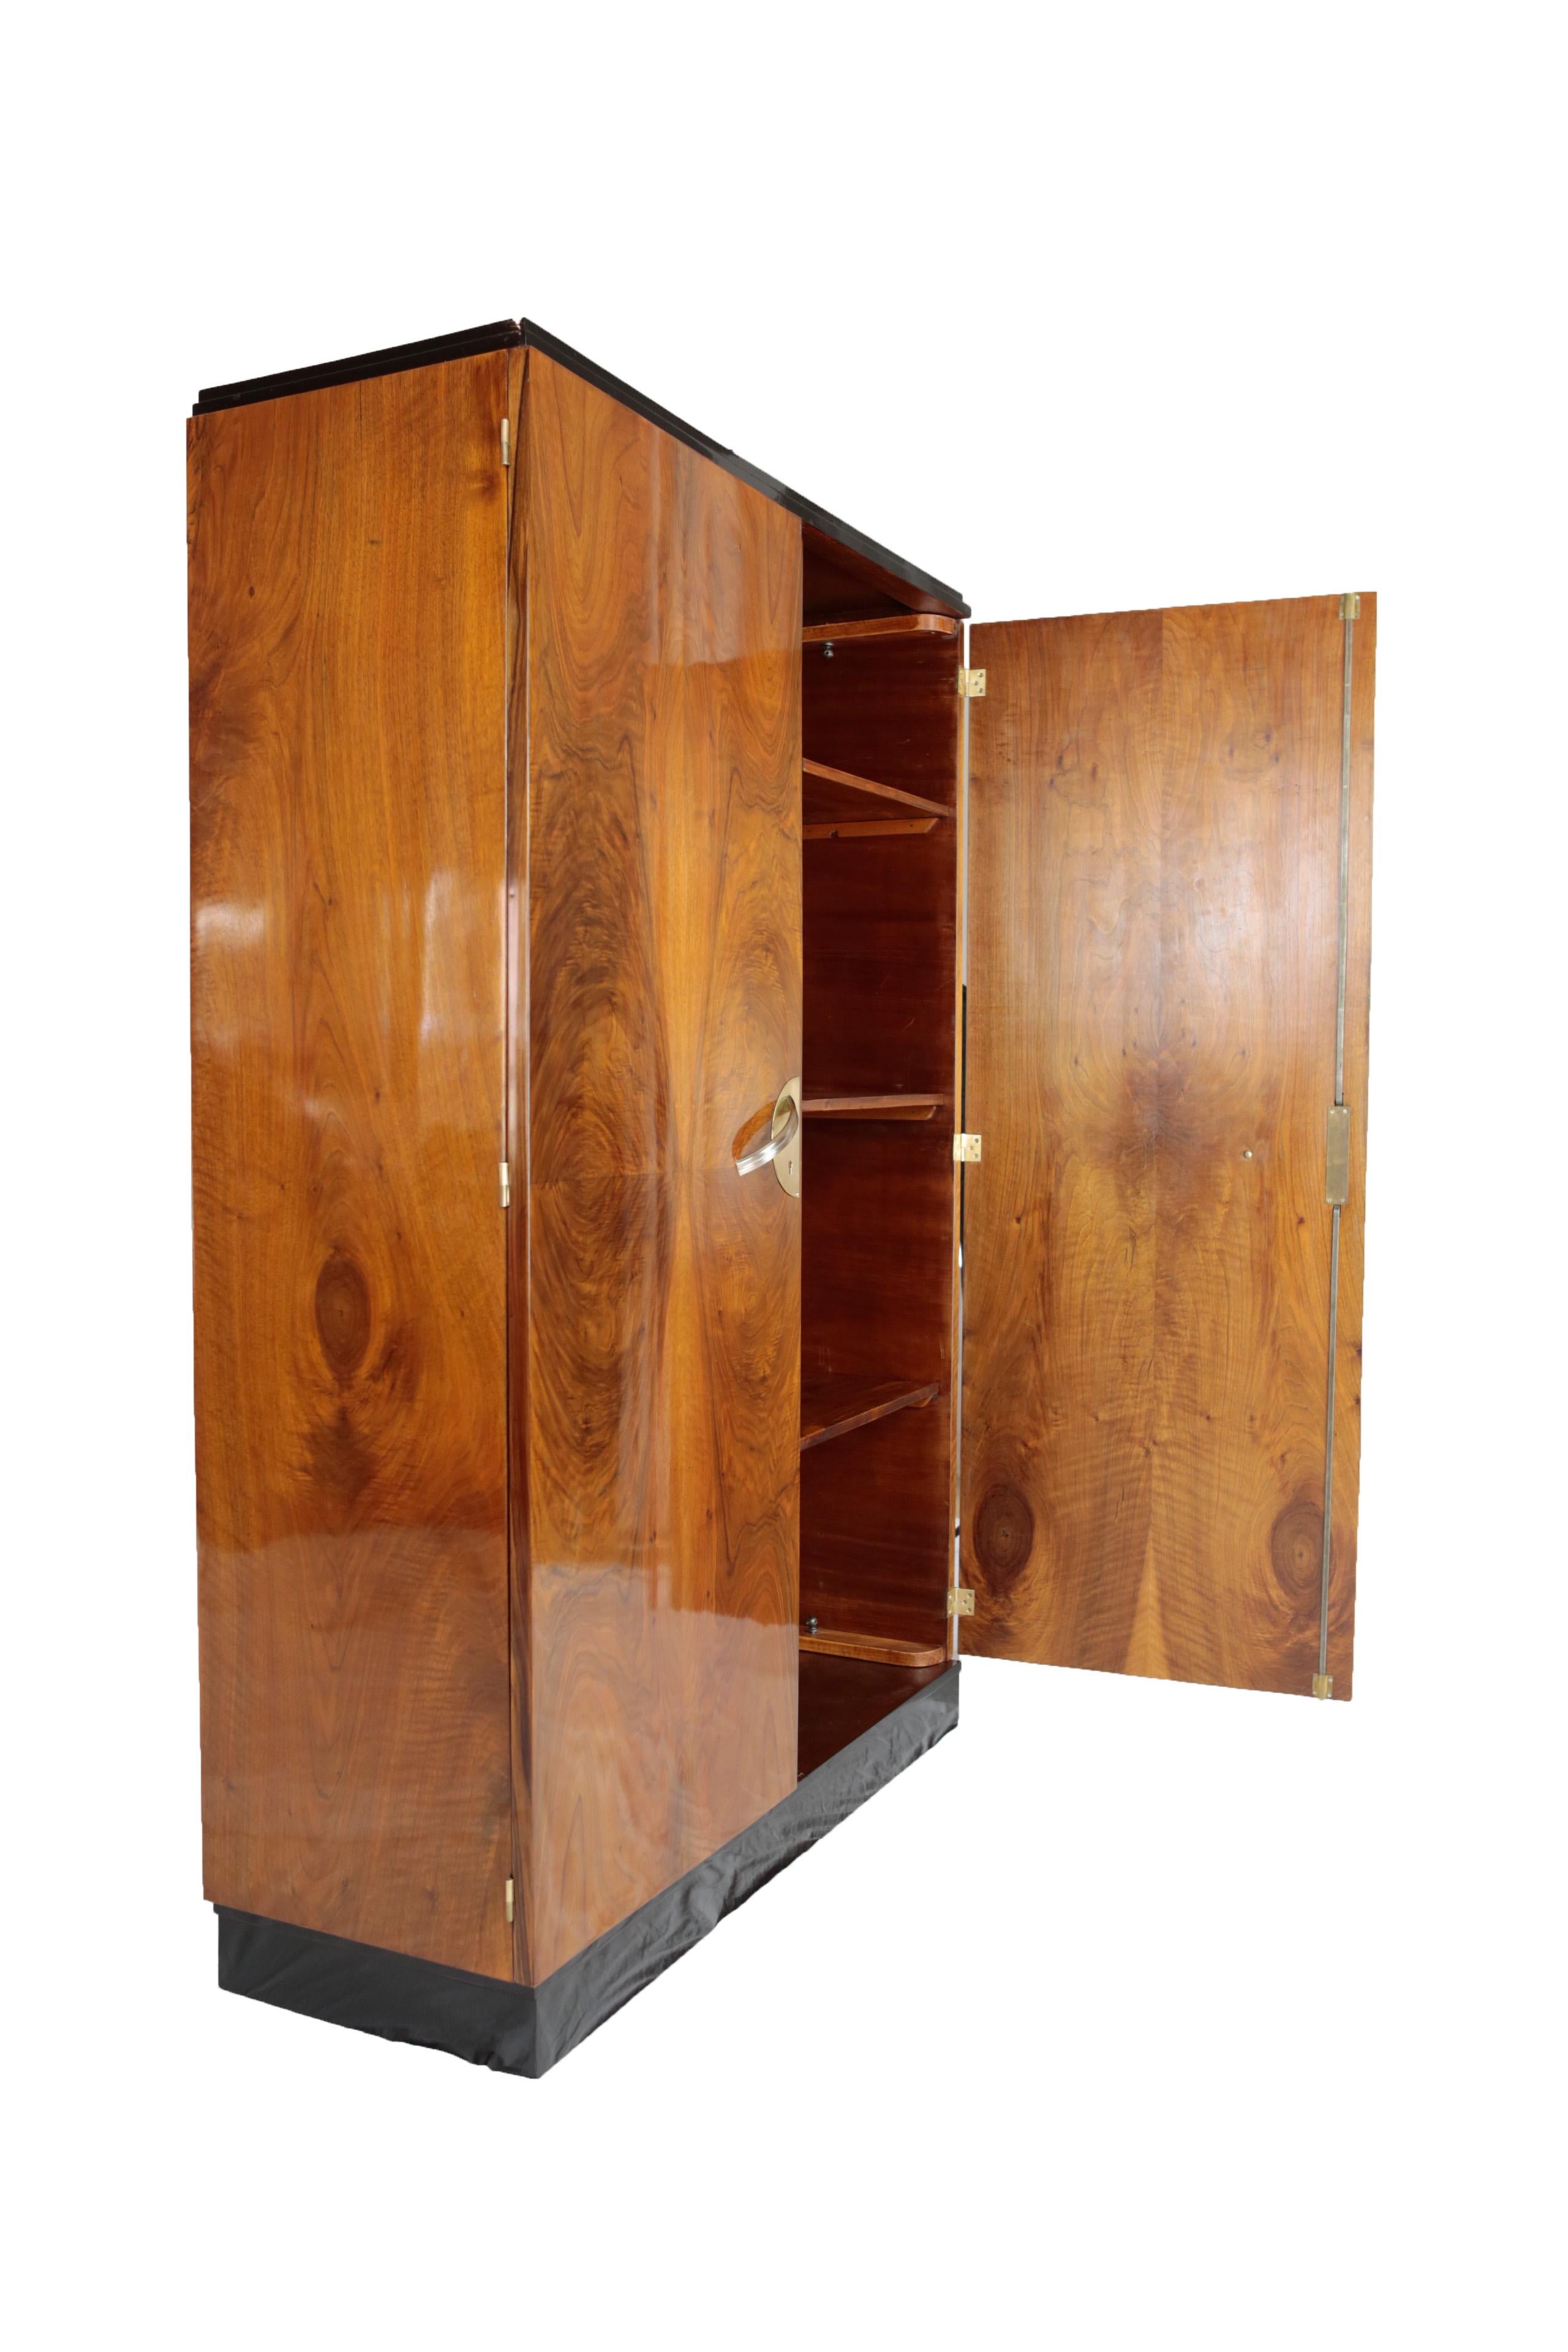 French Art Deco 1920s Cupboard Paris Nutwood with Brass Mountings For Sale 2